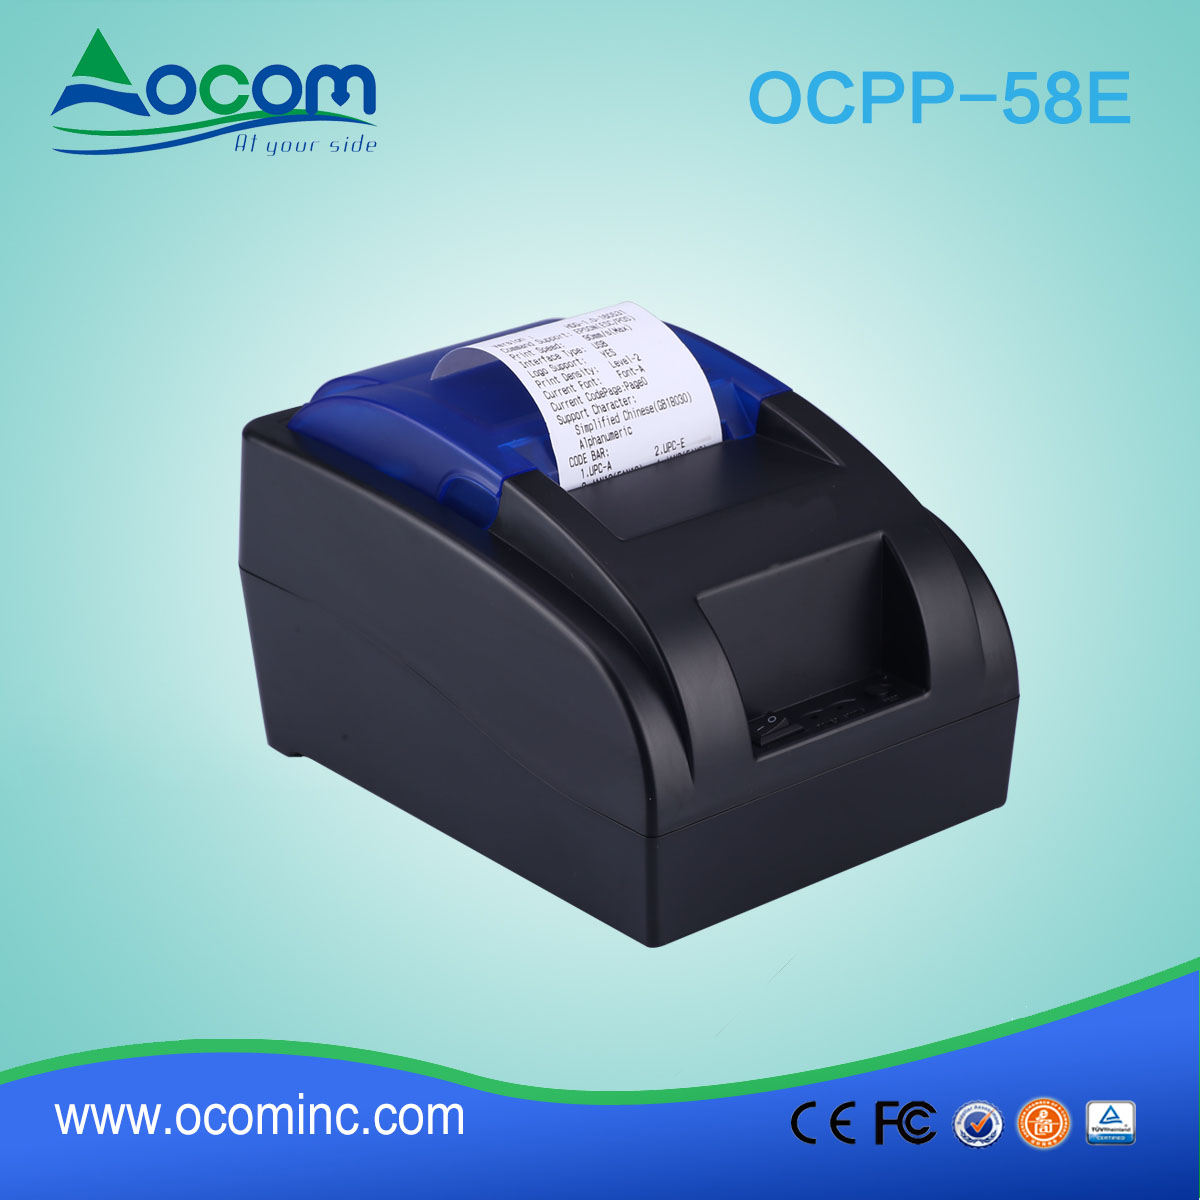 Internal Power Supply Included Thermal Receipt Printer with Cutter